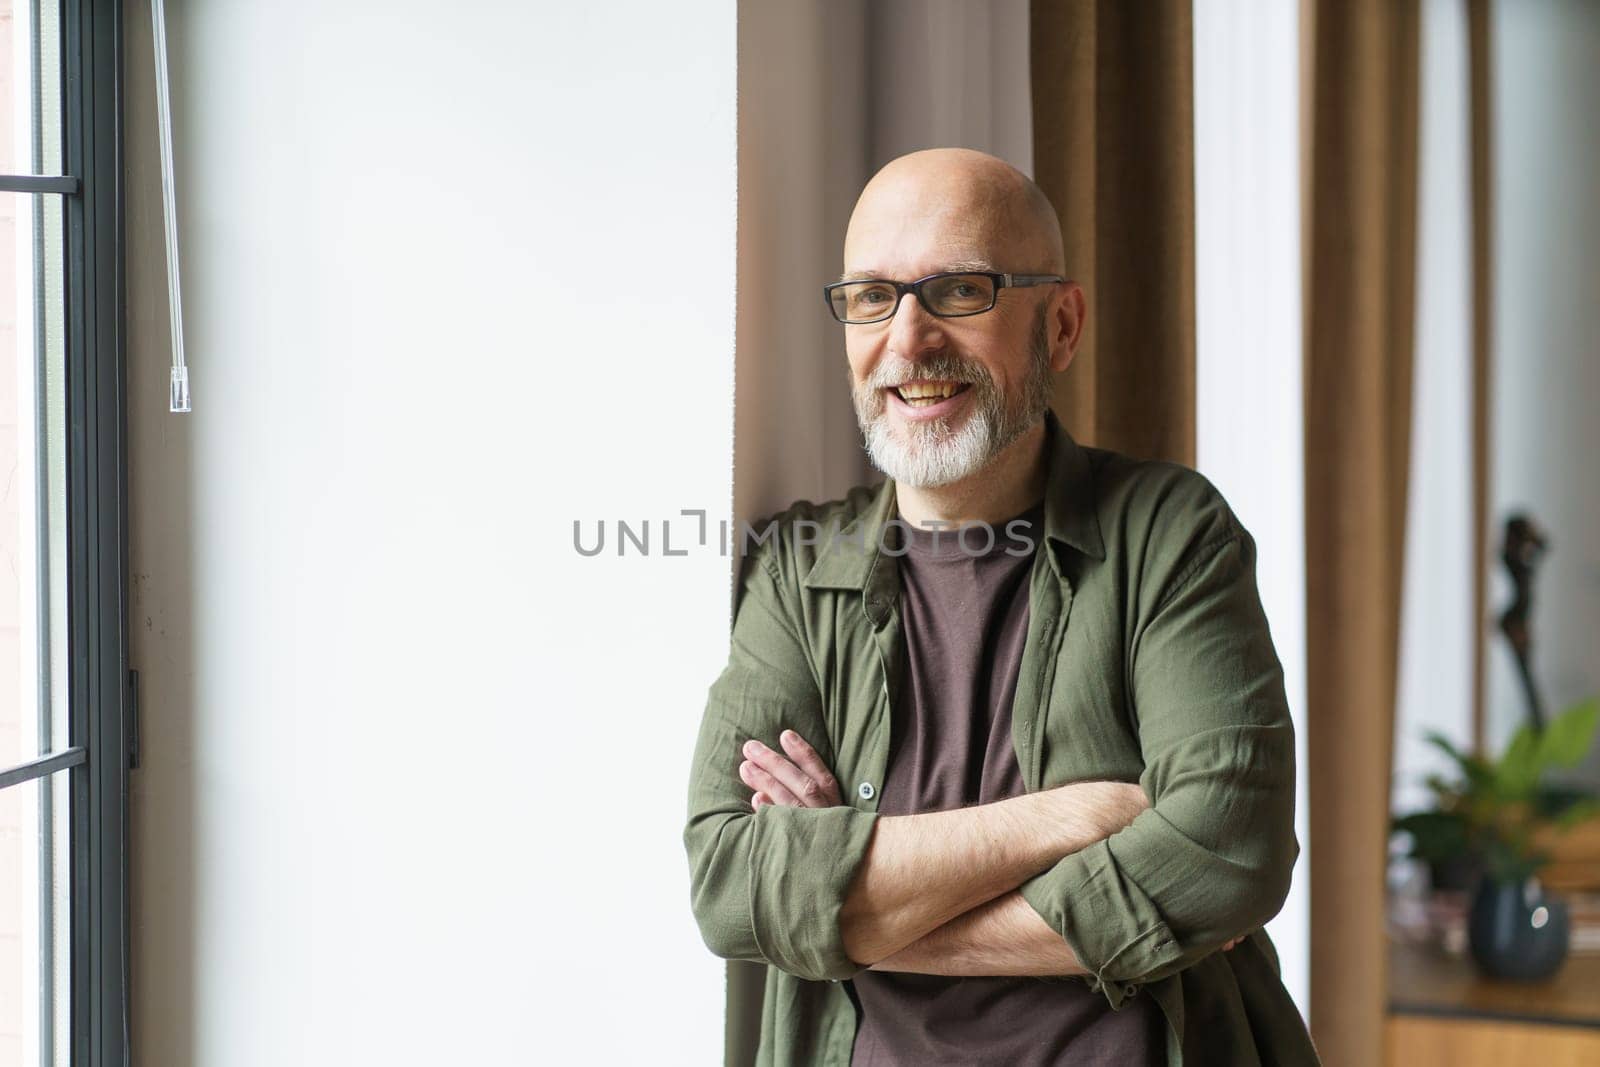 Happy old age as a mature man radiates positivity from the comfort of his own home. Positioned near a window, he smiles warmly towards the camera, emanating a sense of contentment and joy. . High quality photo